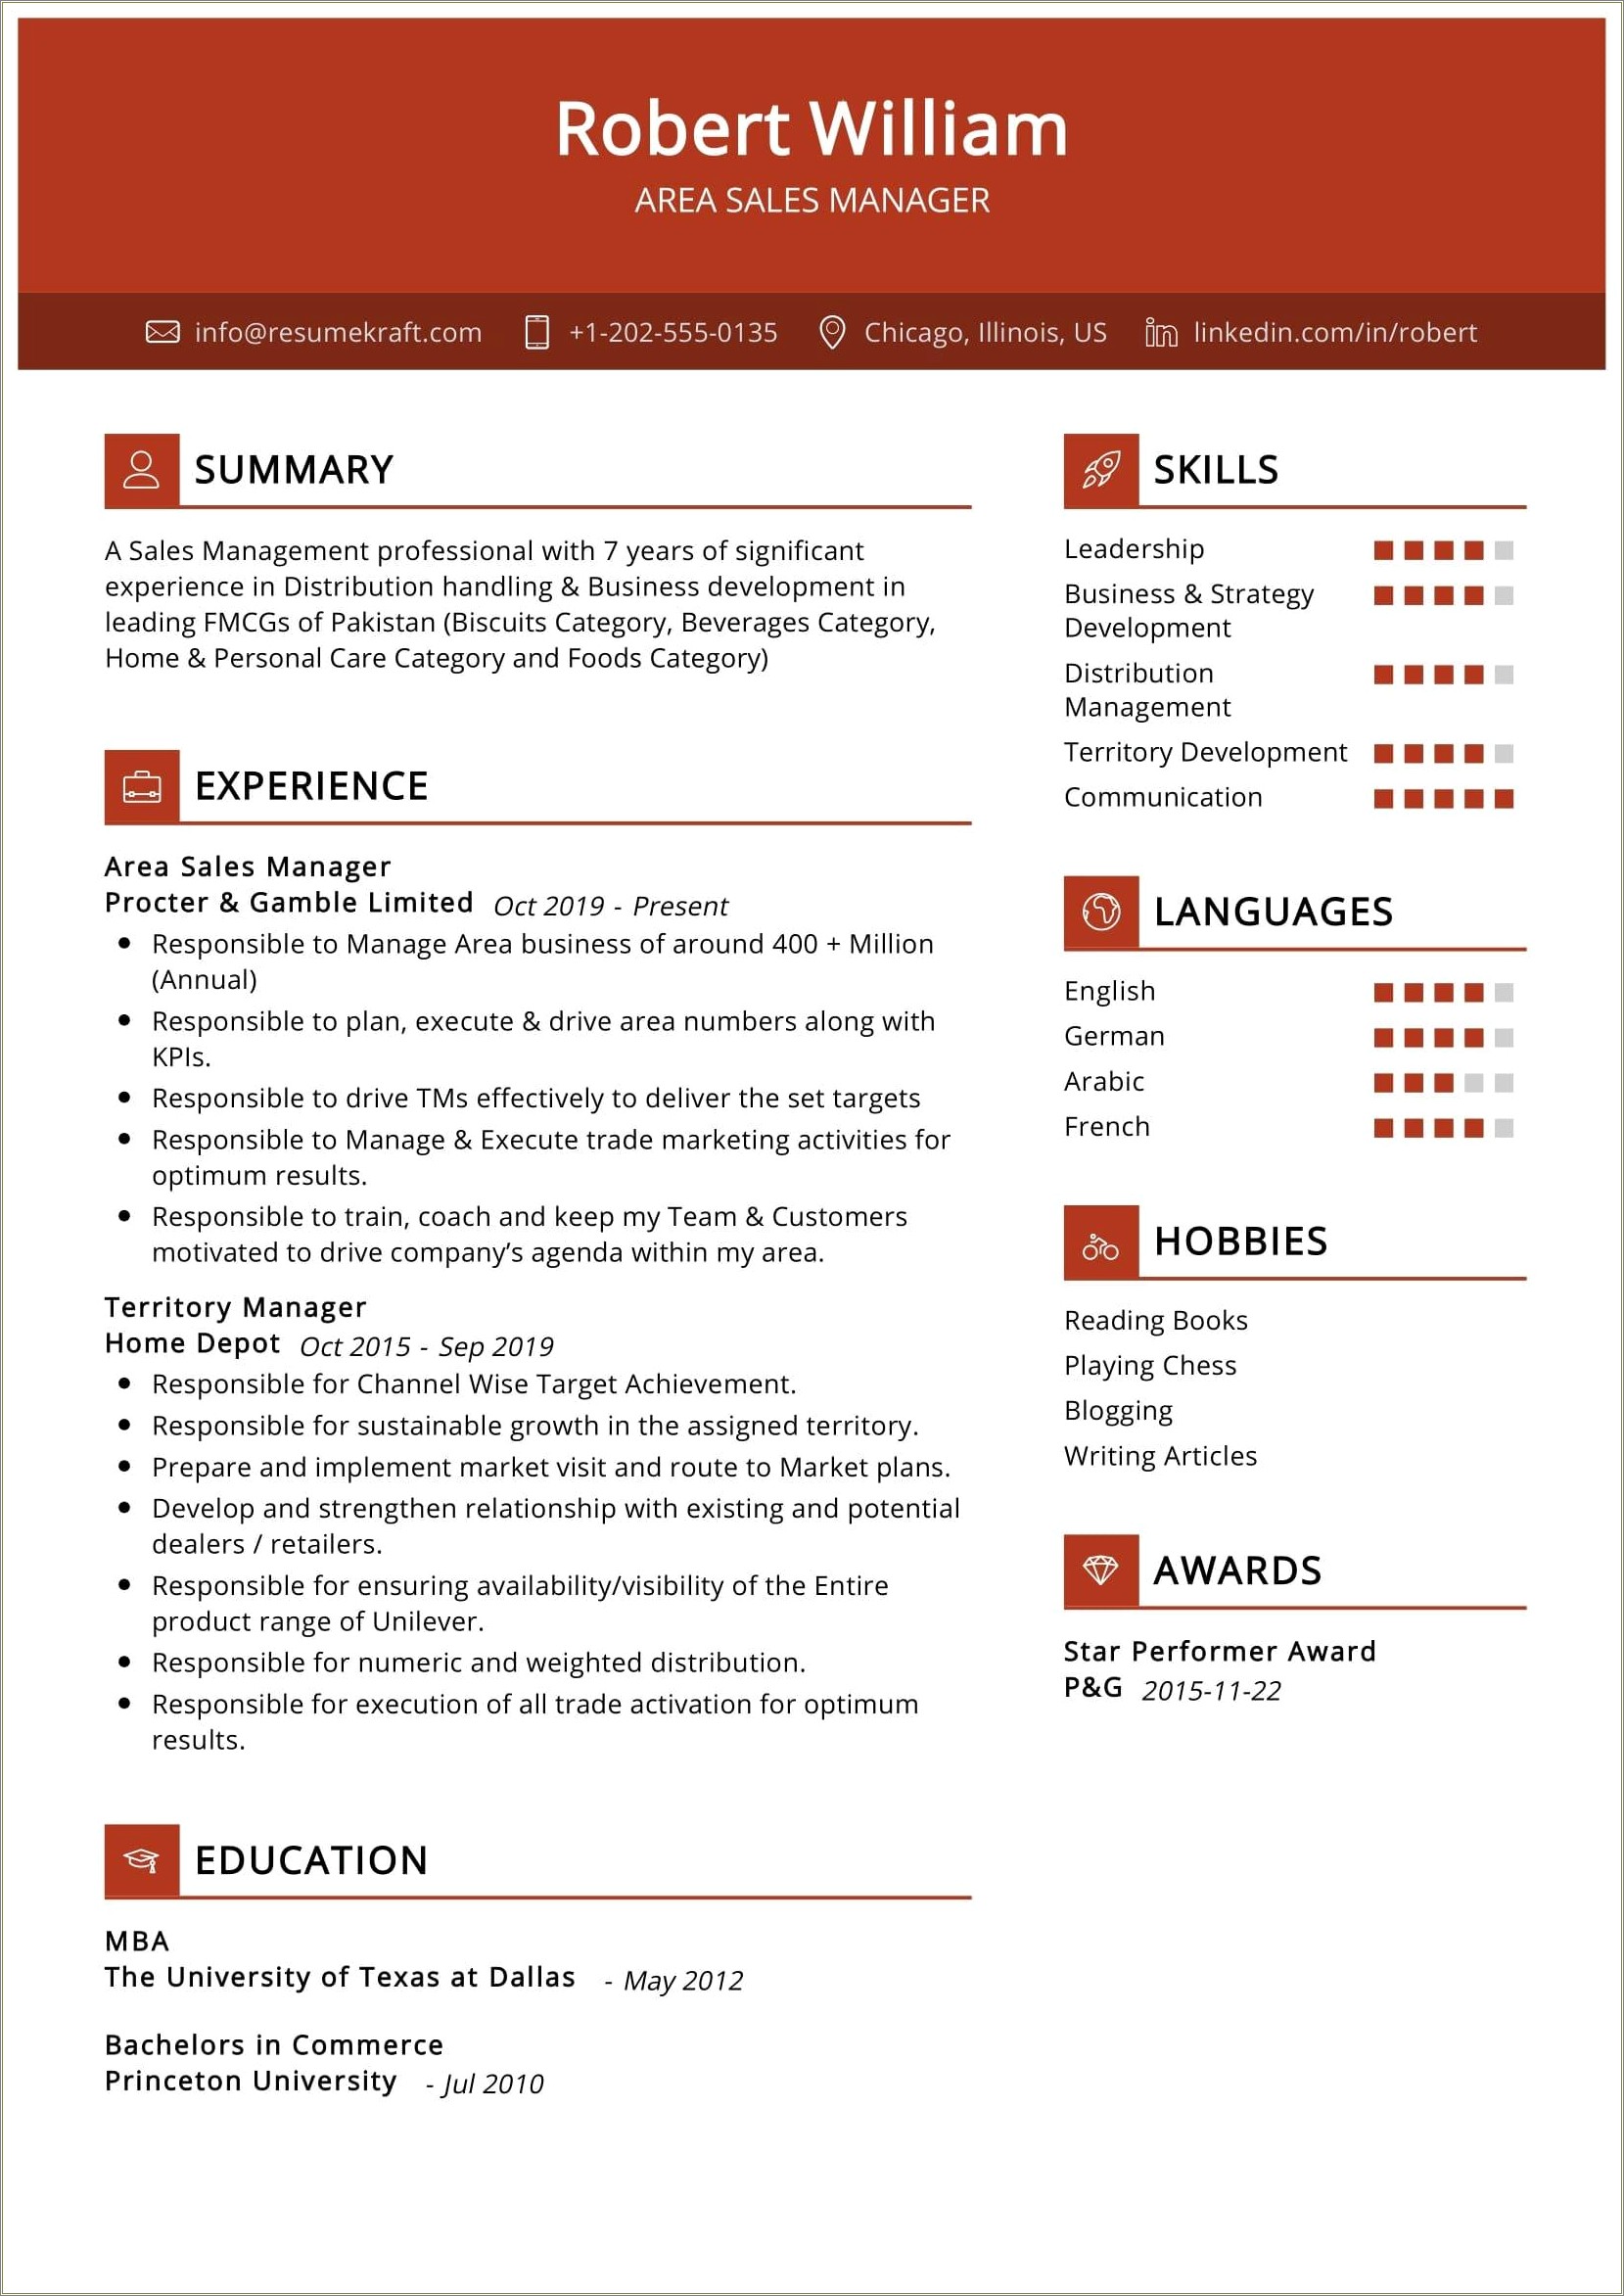 Resume Format For Experienced Sales Manager